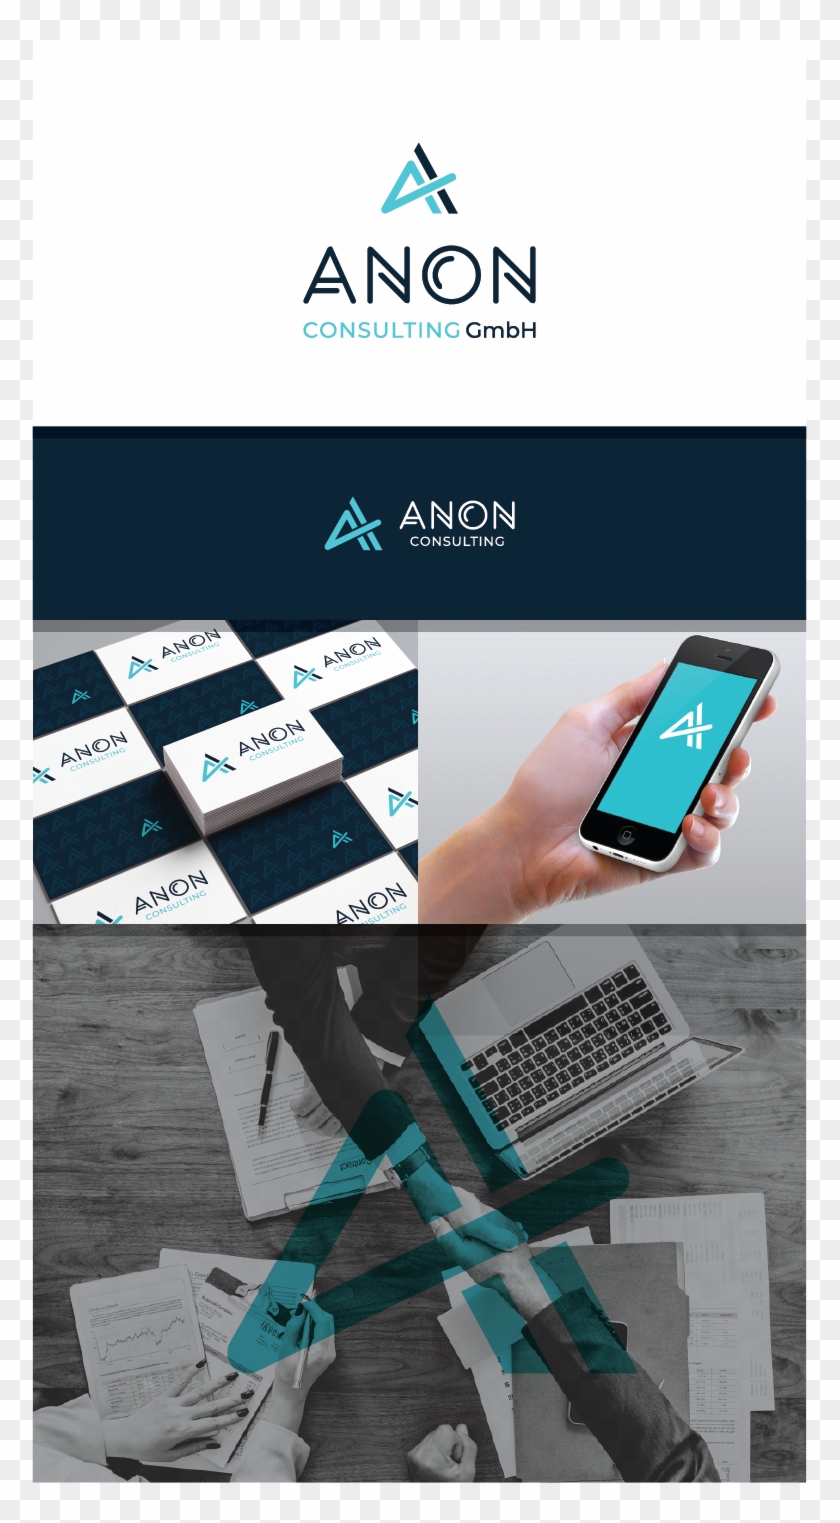 Logo Design By Tata B For Anon Consulting Gmbh Pexels Workshop Hd Png Download 775x1443 Pngfind